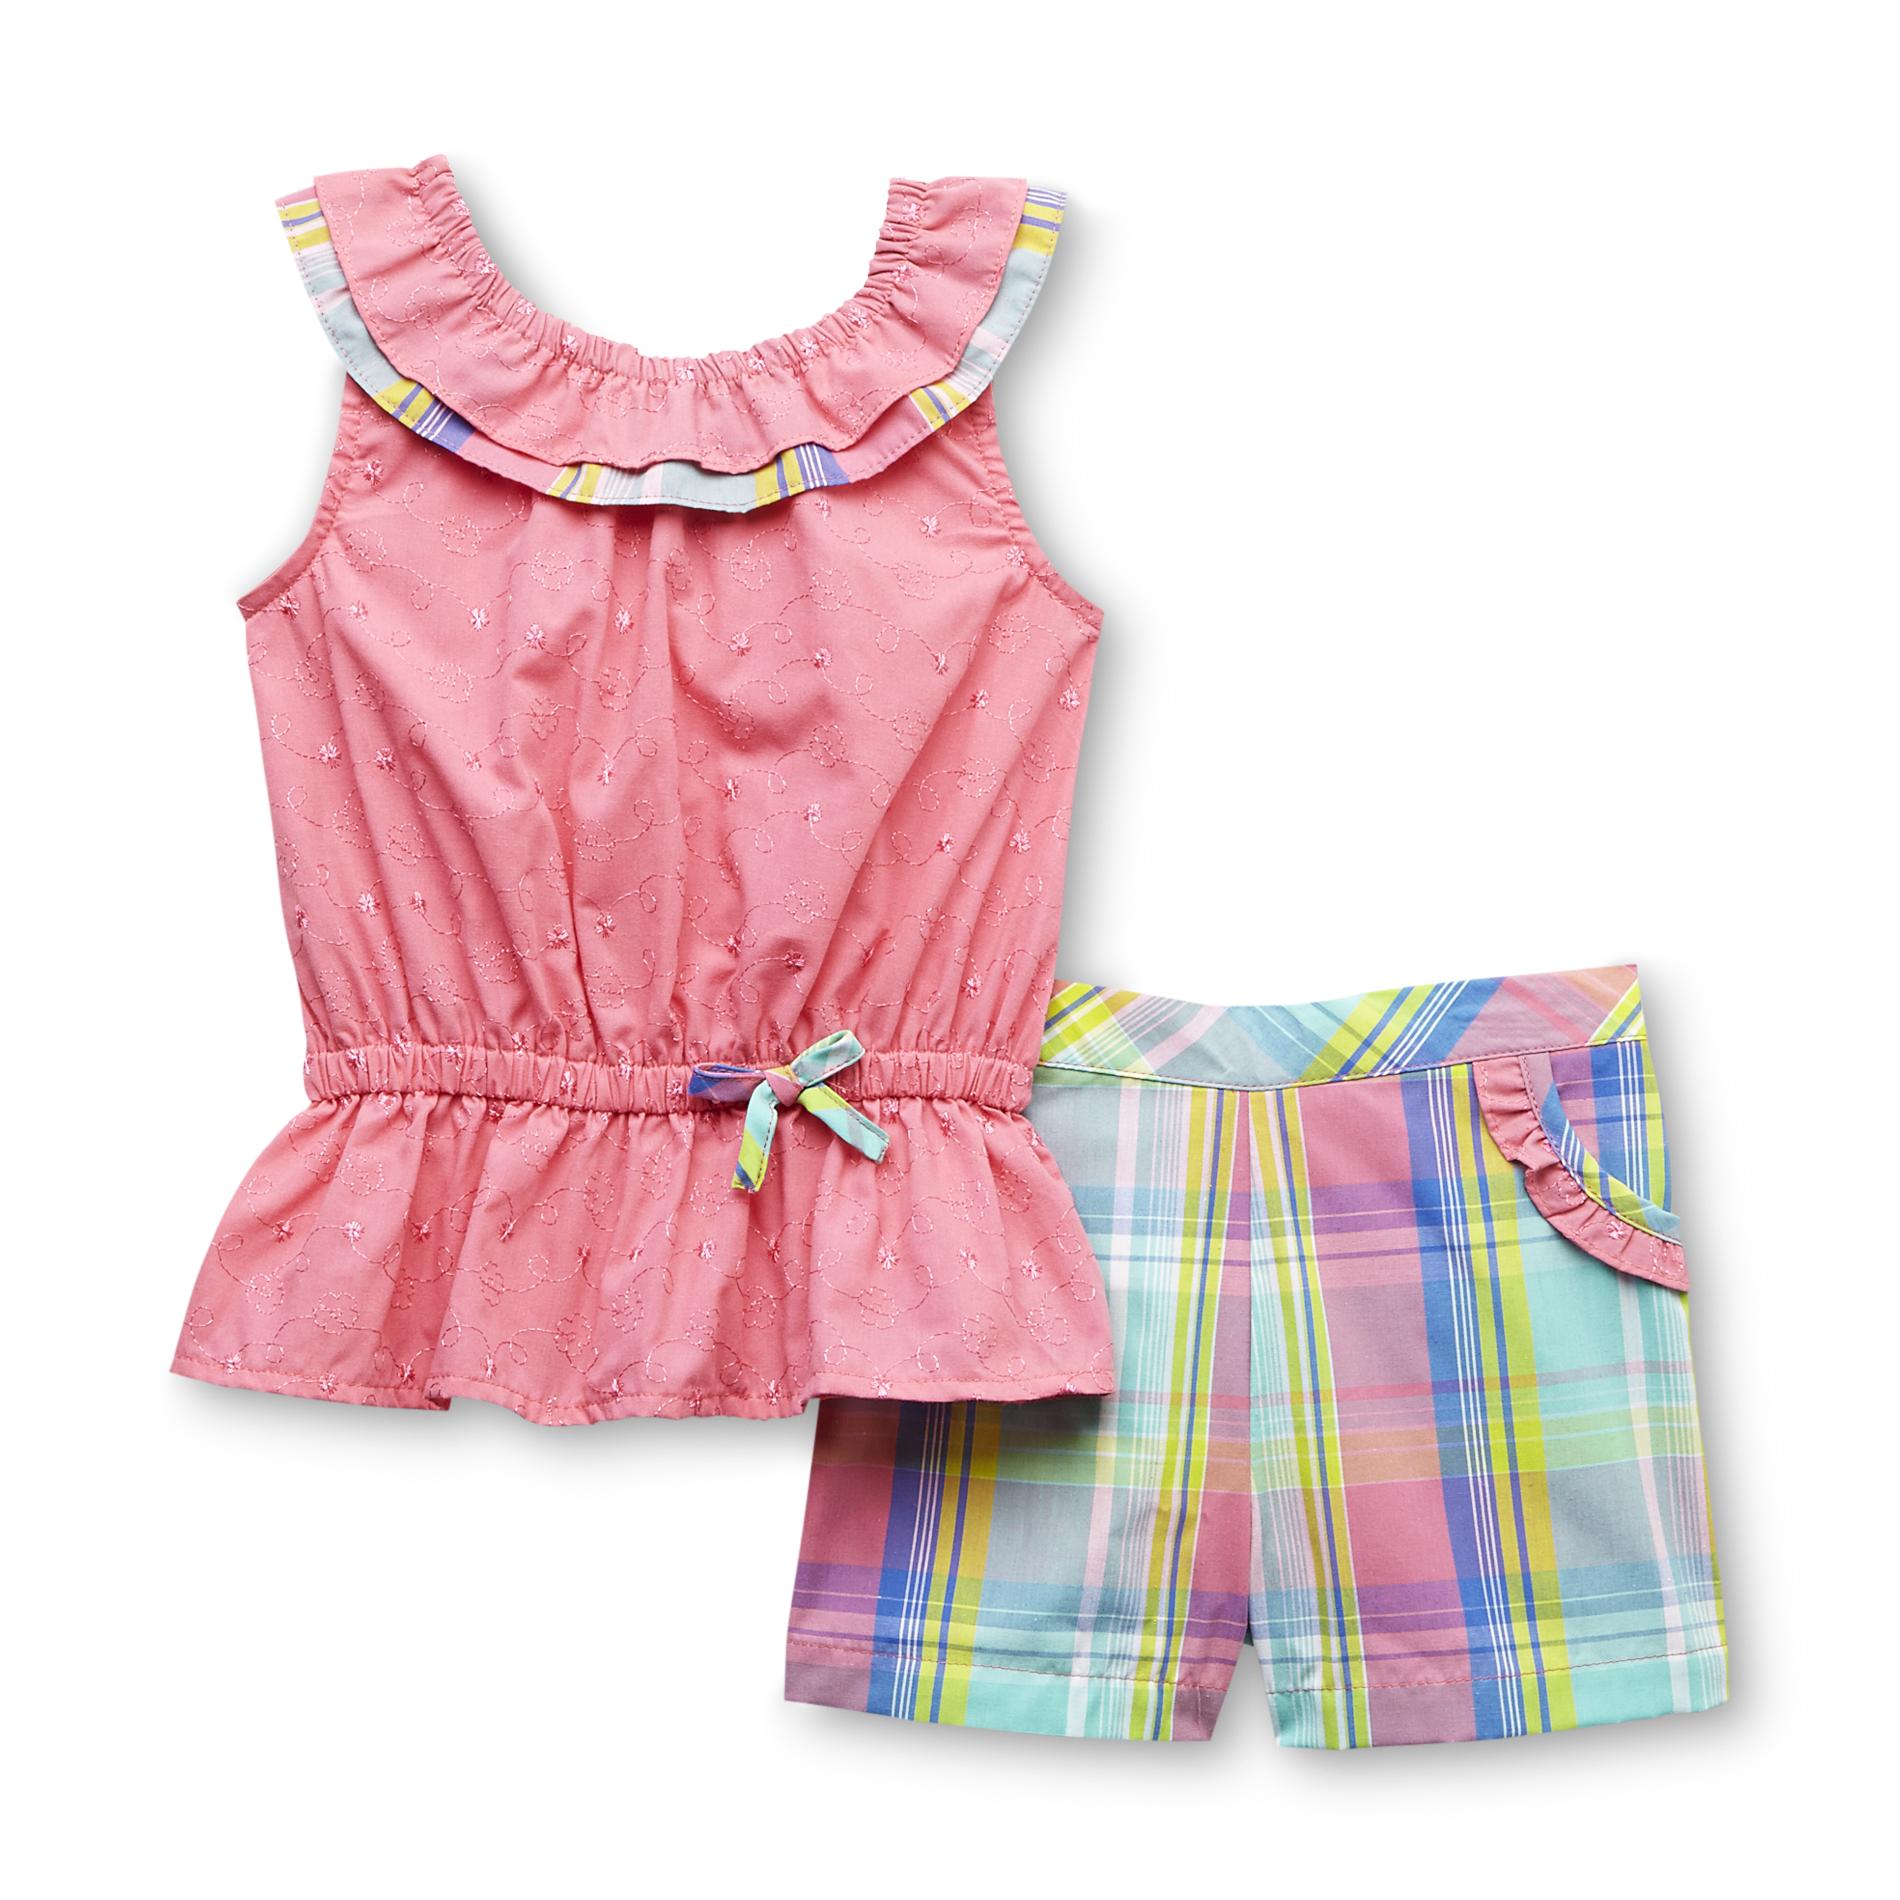 Penny M Infant & Toddler Girl's Ruffle Top & Shorts - Embroidery & Plaid